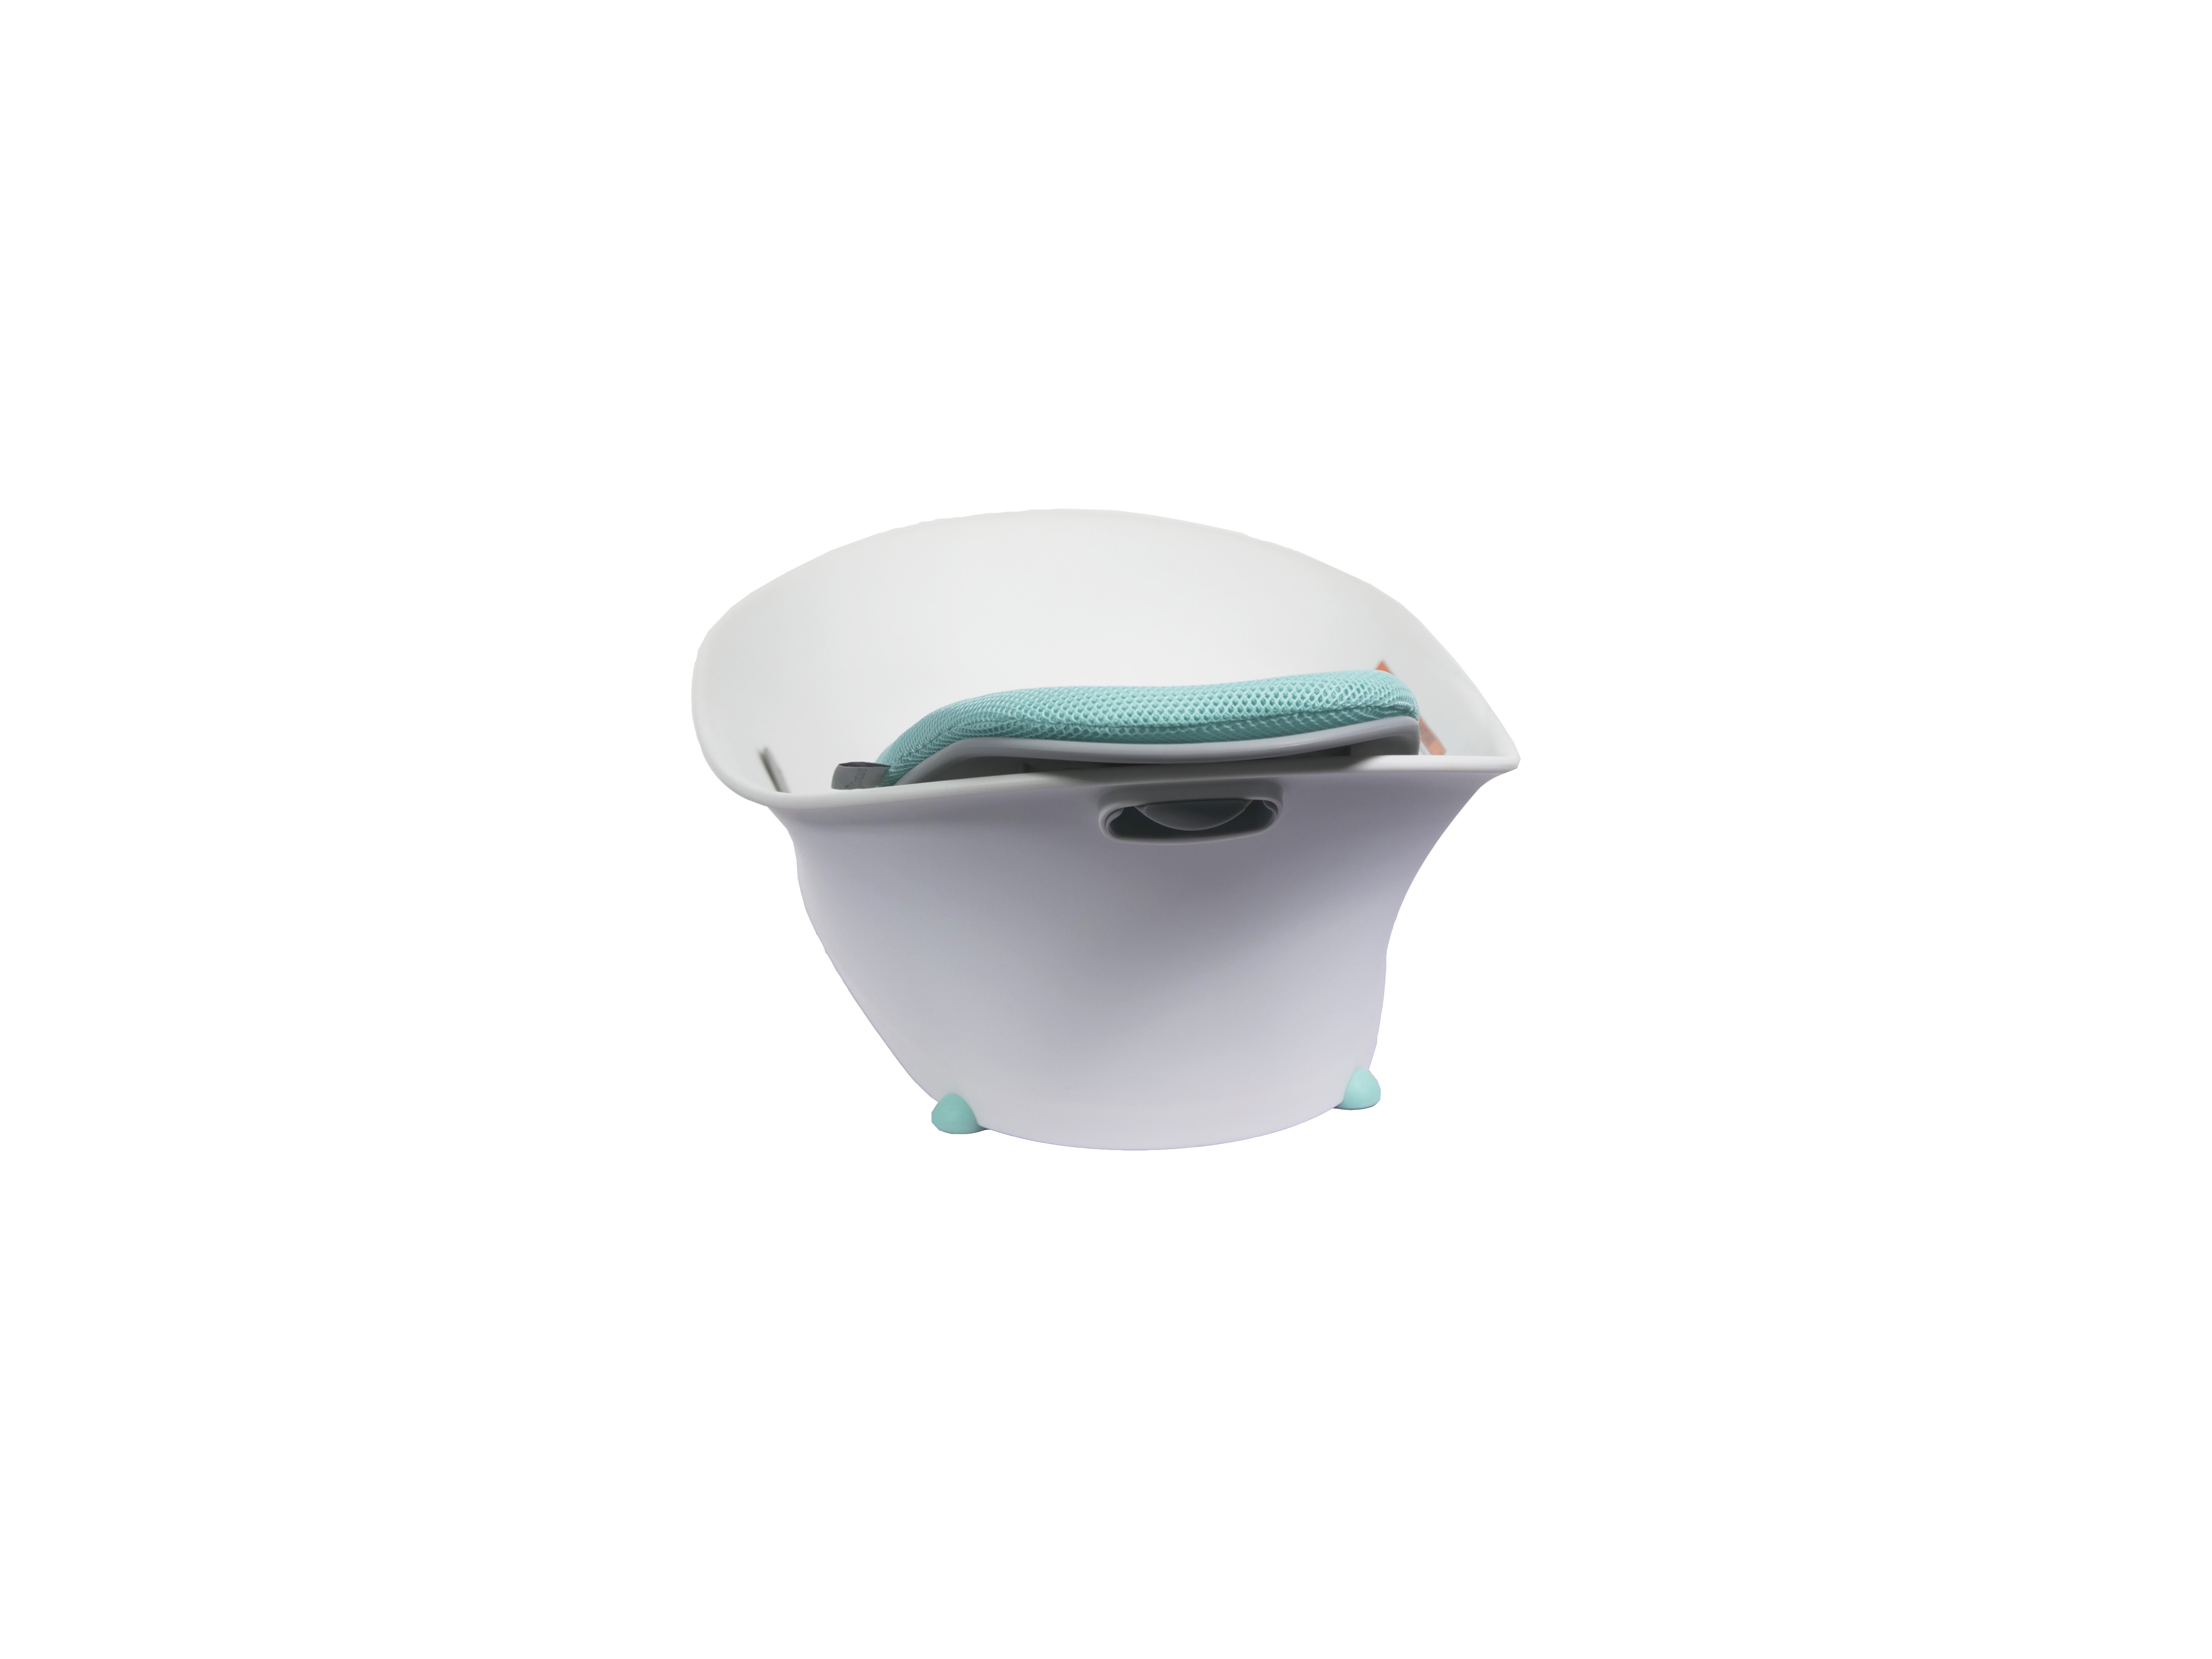 Contours Oasis® 2-in-1 Comfort Cushion Tub